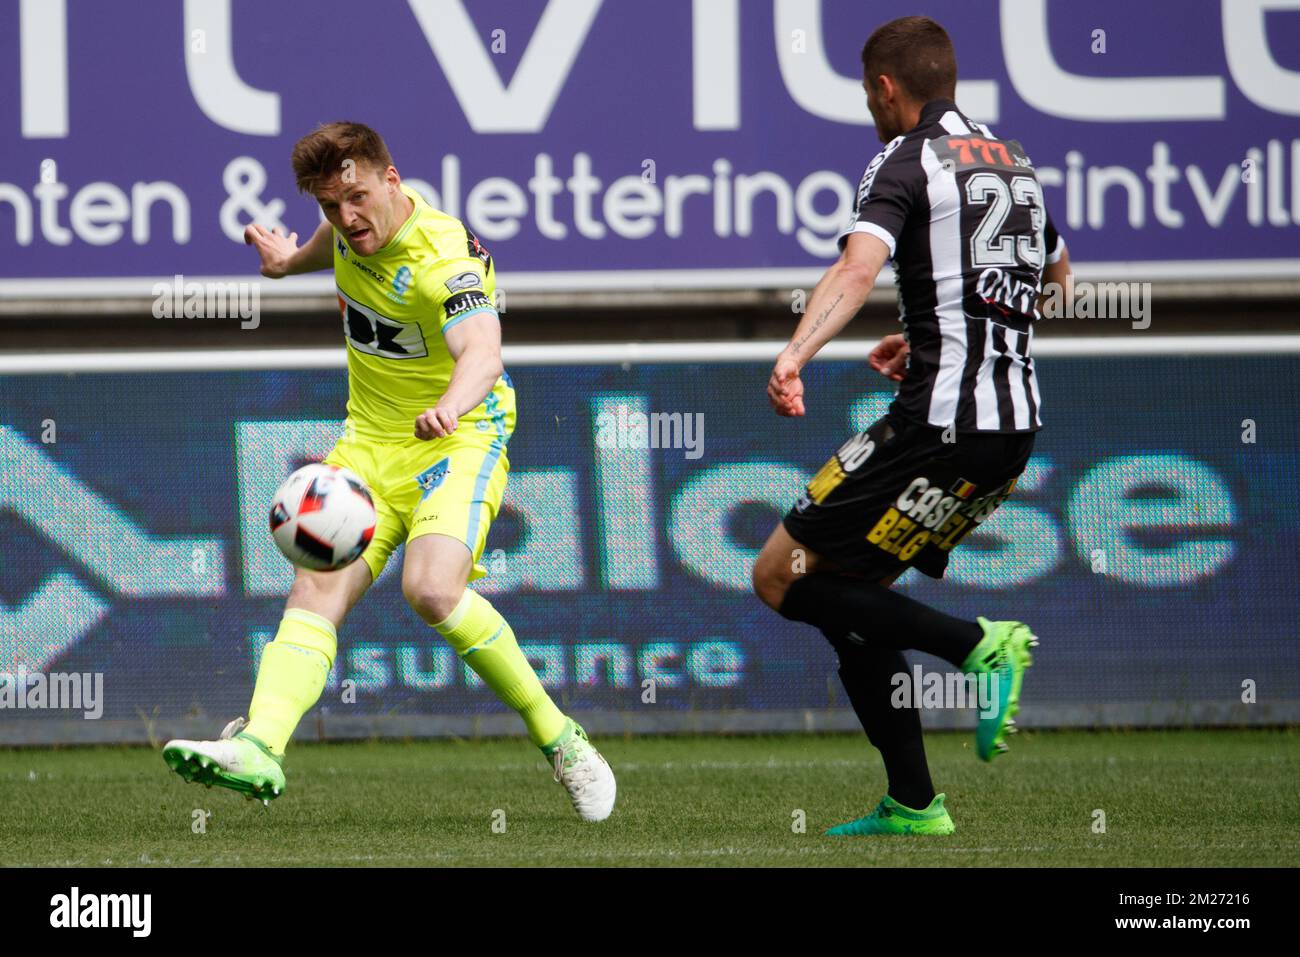 Gent's Thomas Foket and Charleroi's Steeven Willems fight for the ball during the Jupiler Pro League match between KAA Gent and Sporting Charleroi, in Gent, Sunday 14 May 2017, on day 8 (out of 10) of the Play-off 1 of the Belgian soccer championship. BELGA PHOTO KURT DESPLENTER Stock Photo